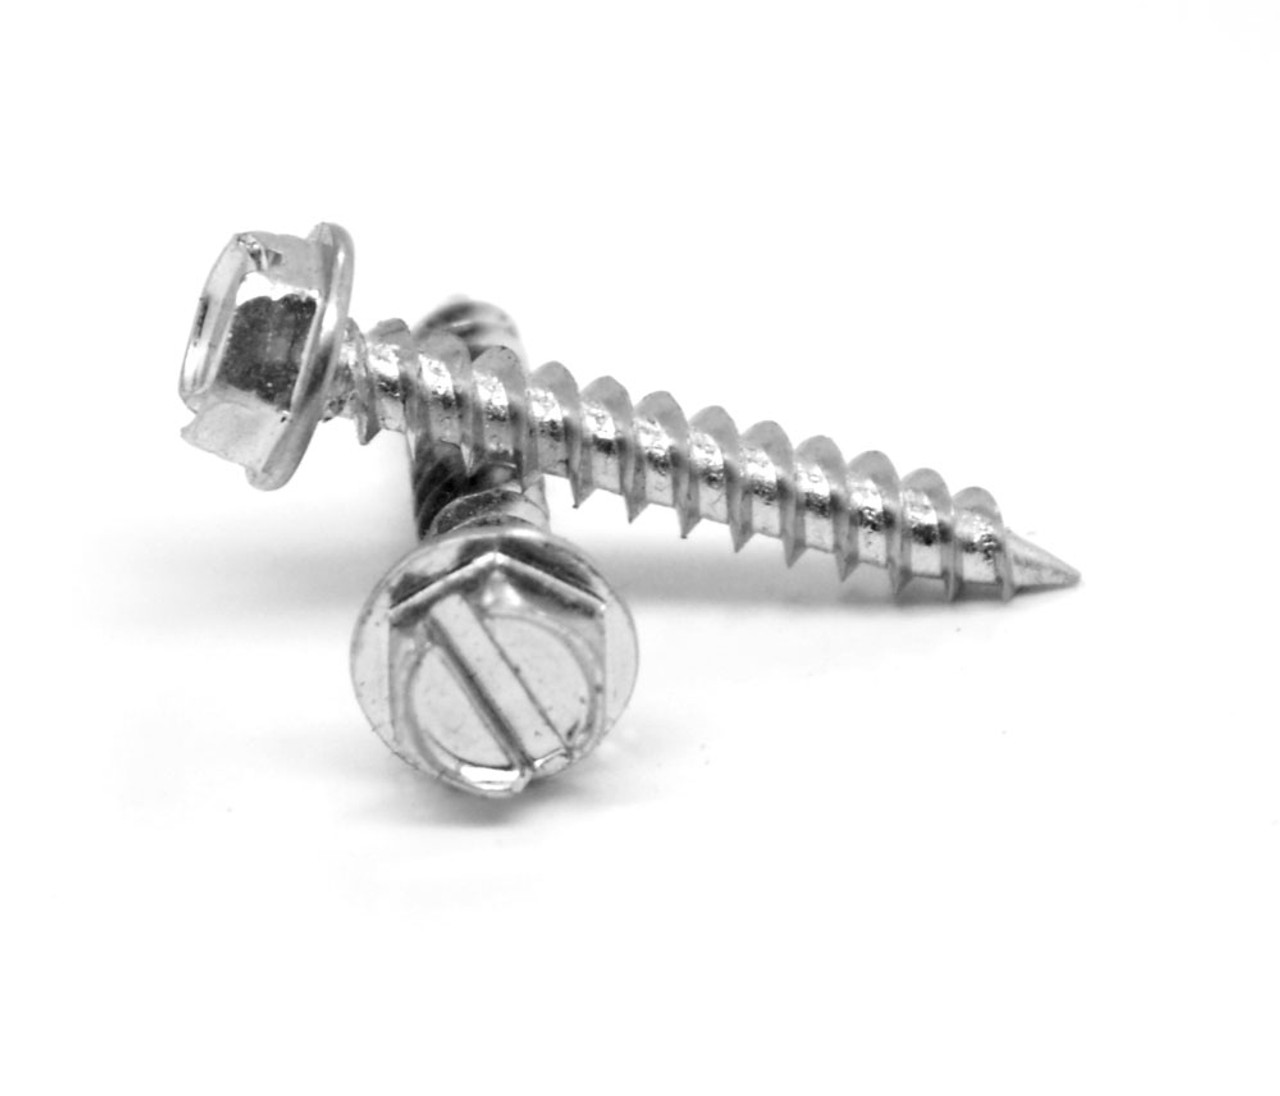 #4-24 x 1/2" Sheet Metal Screw Slotted Hex Washer Head Type AB Low Carbon Steel Zinc Plated